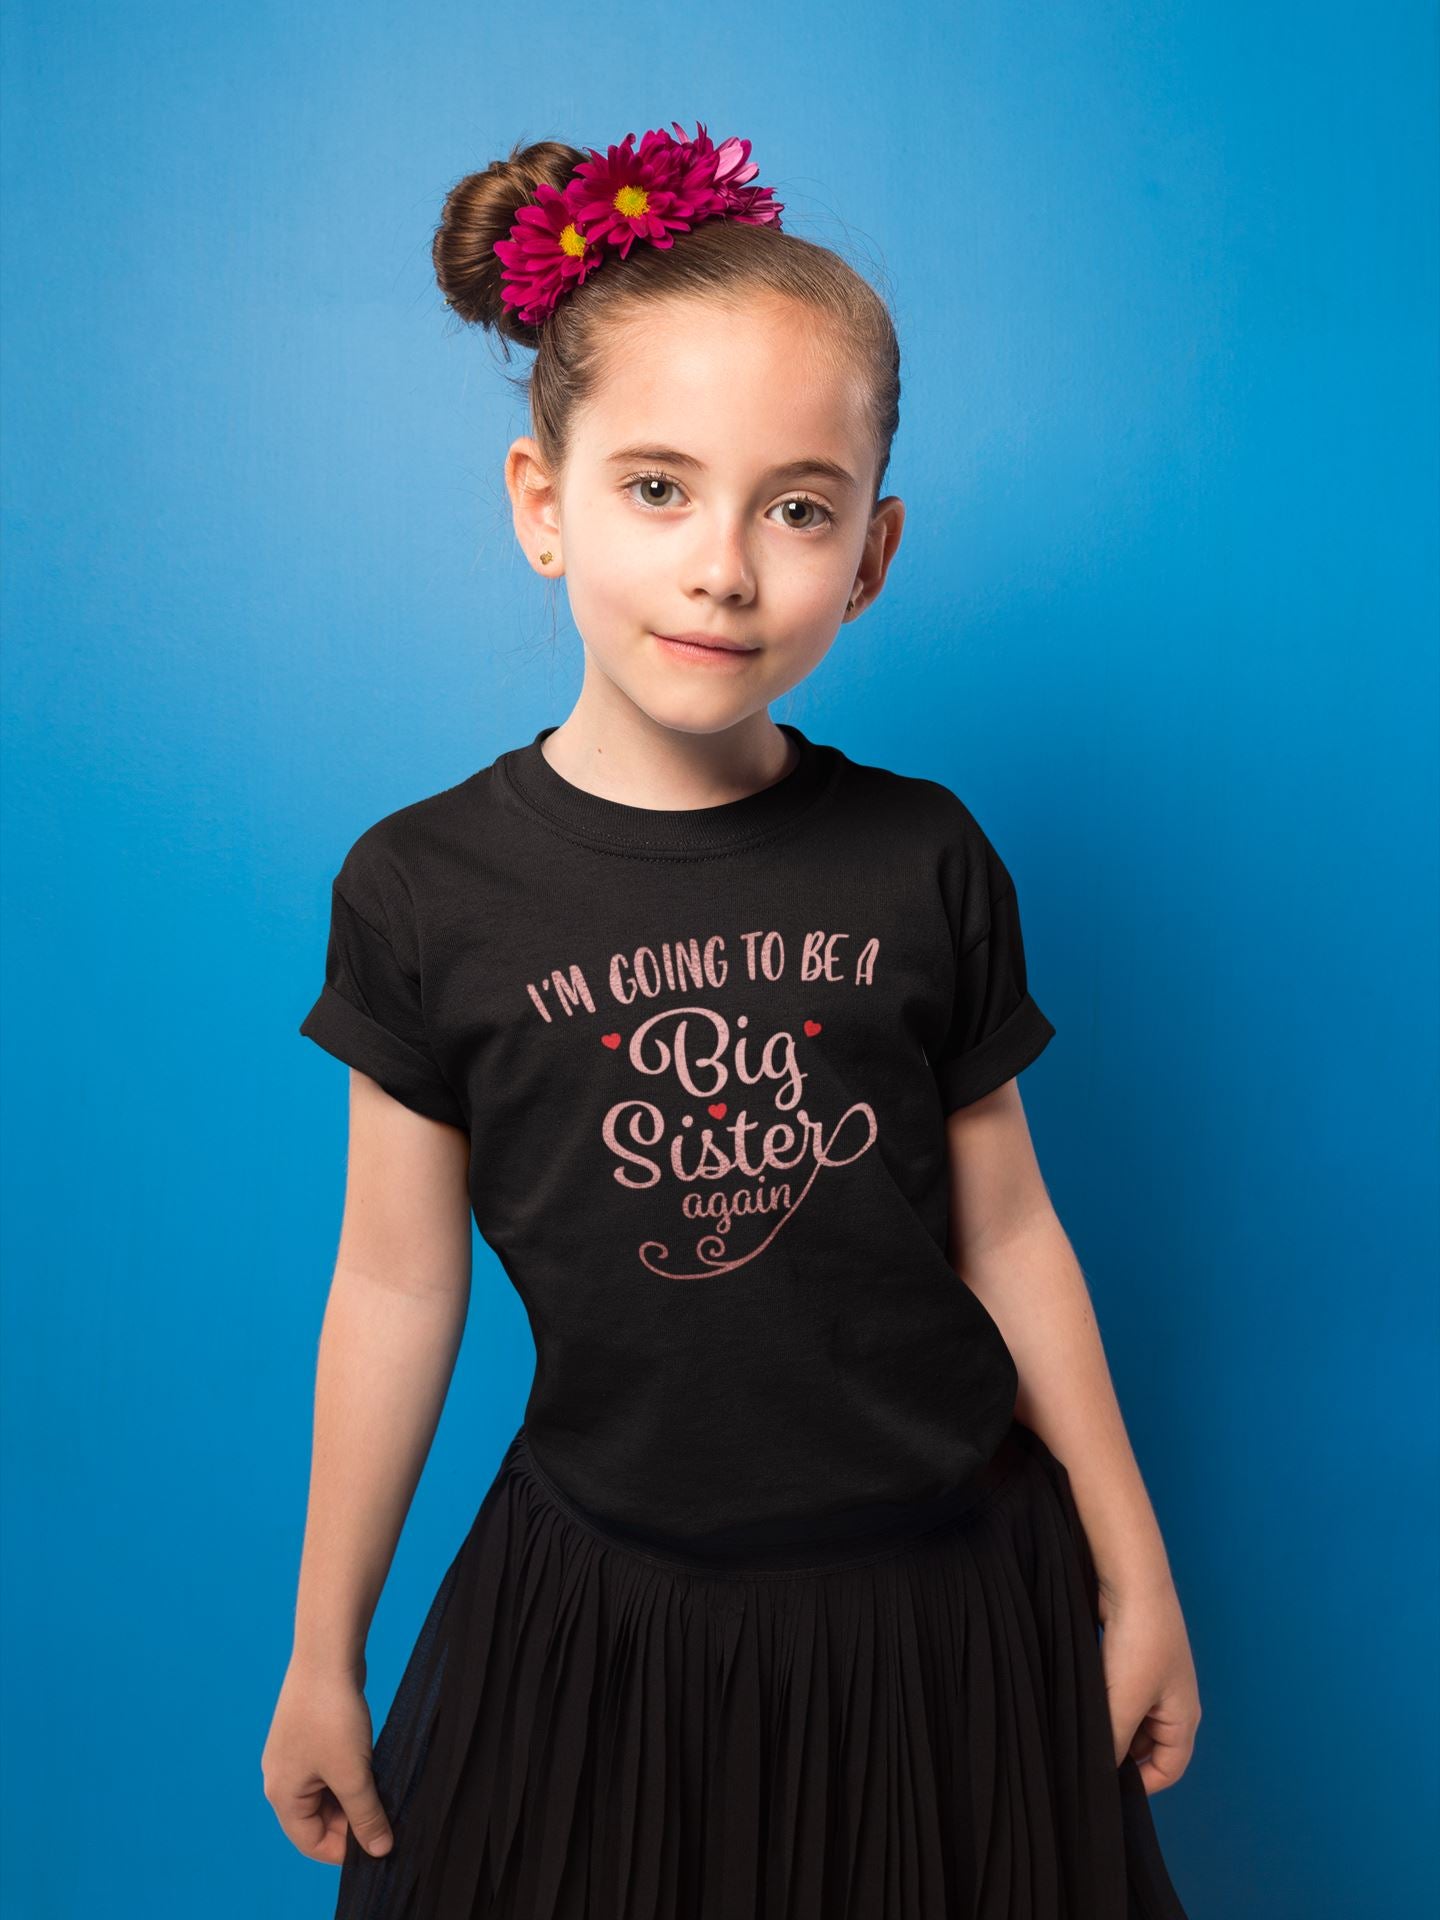 Going to Be a Big Sister Again T-shirt